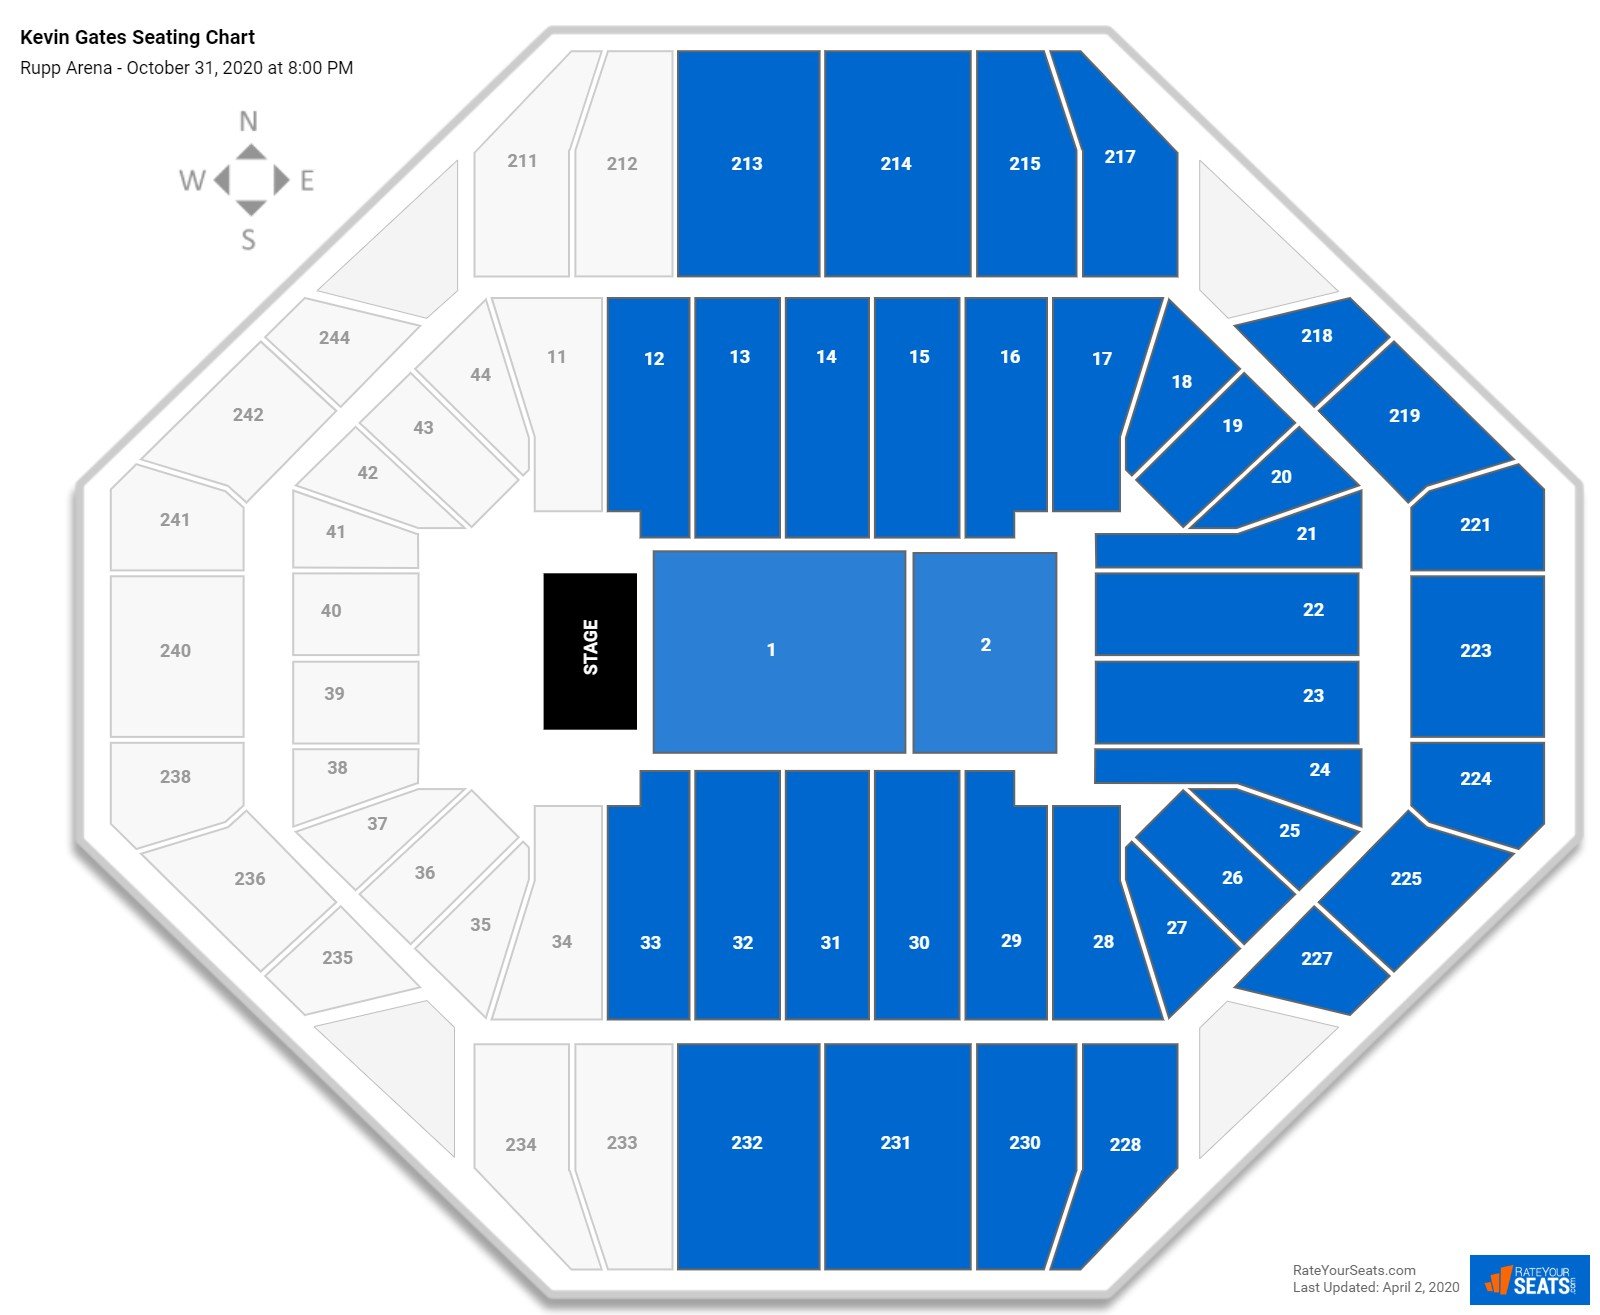 Rupp Arena Seating Charts for Concerts